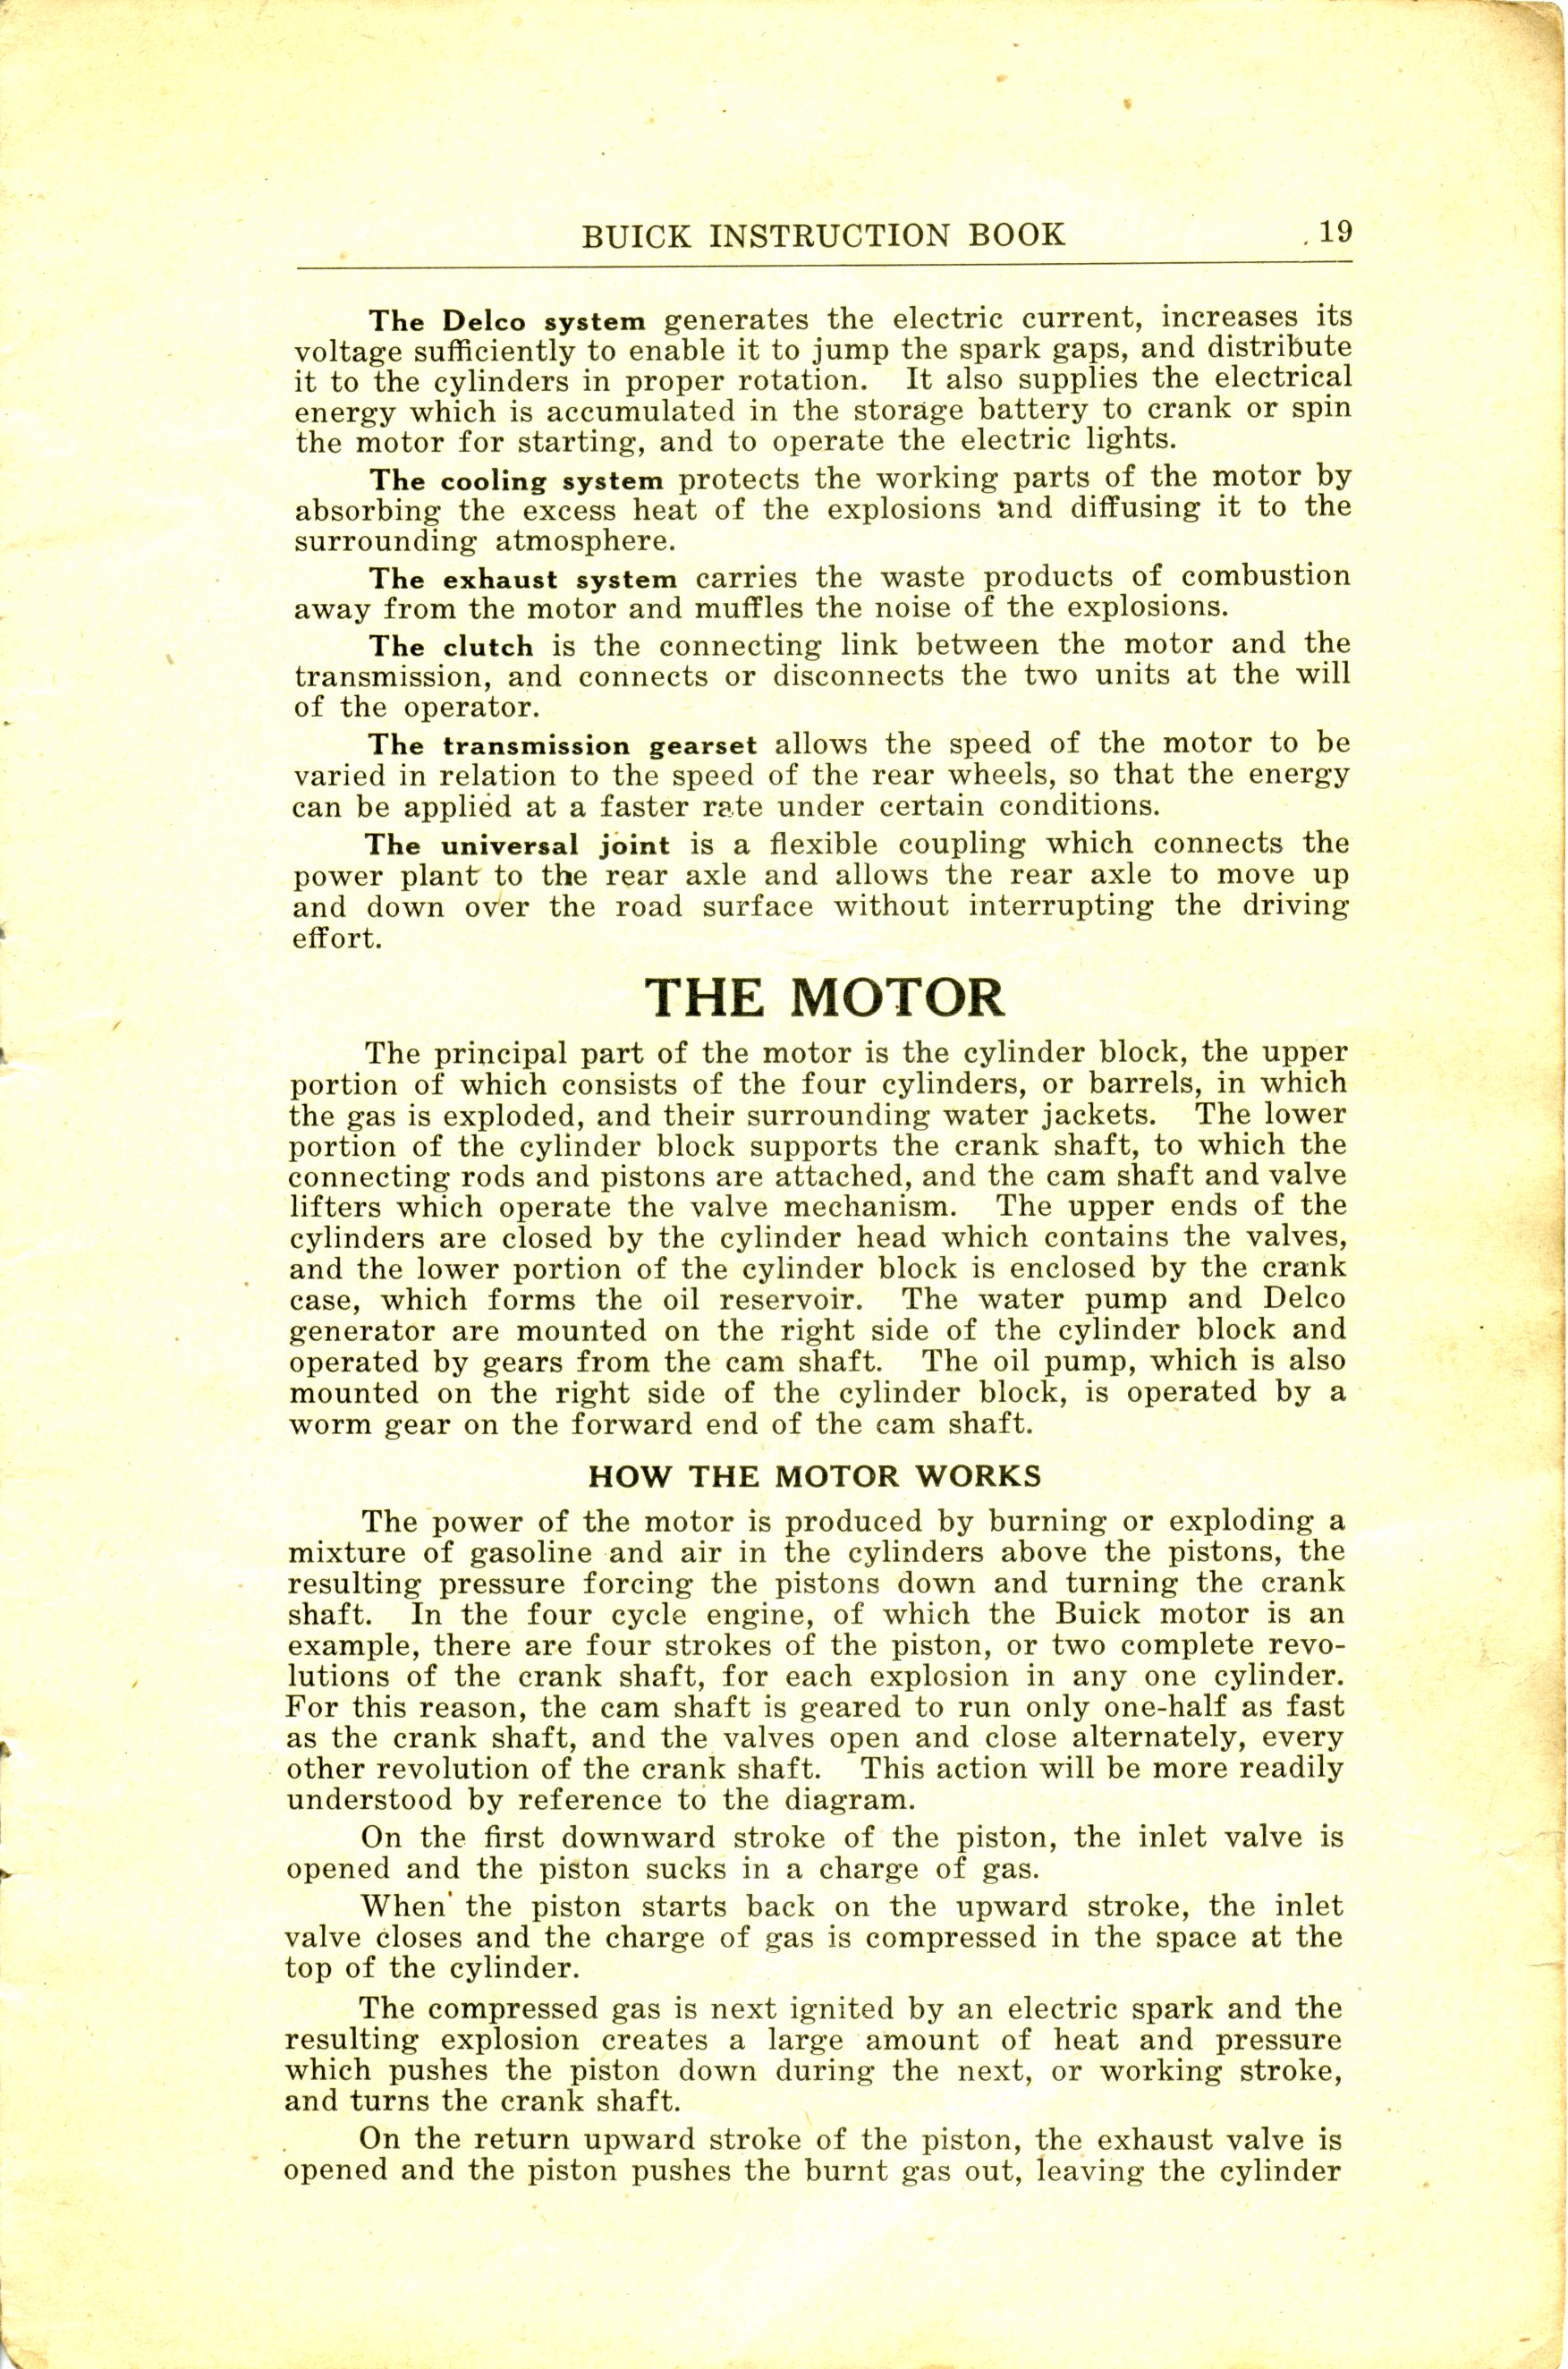 1918 Buick Instruction Book-4 Cyl-19